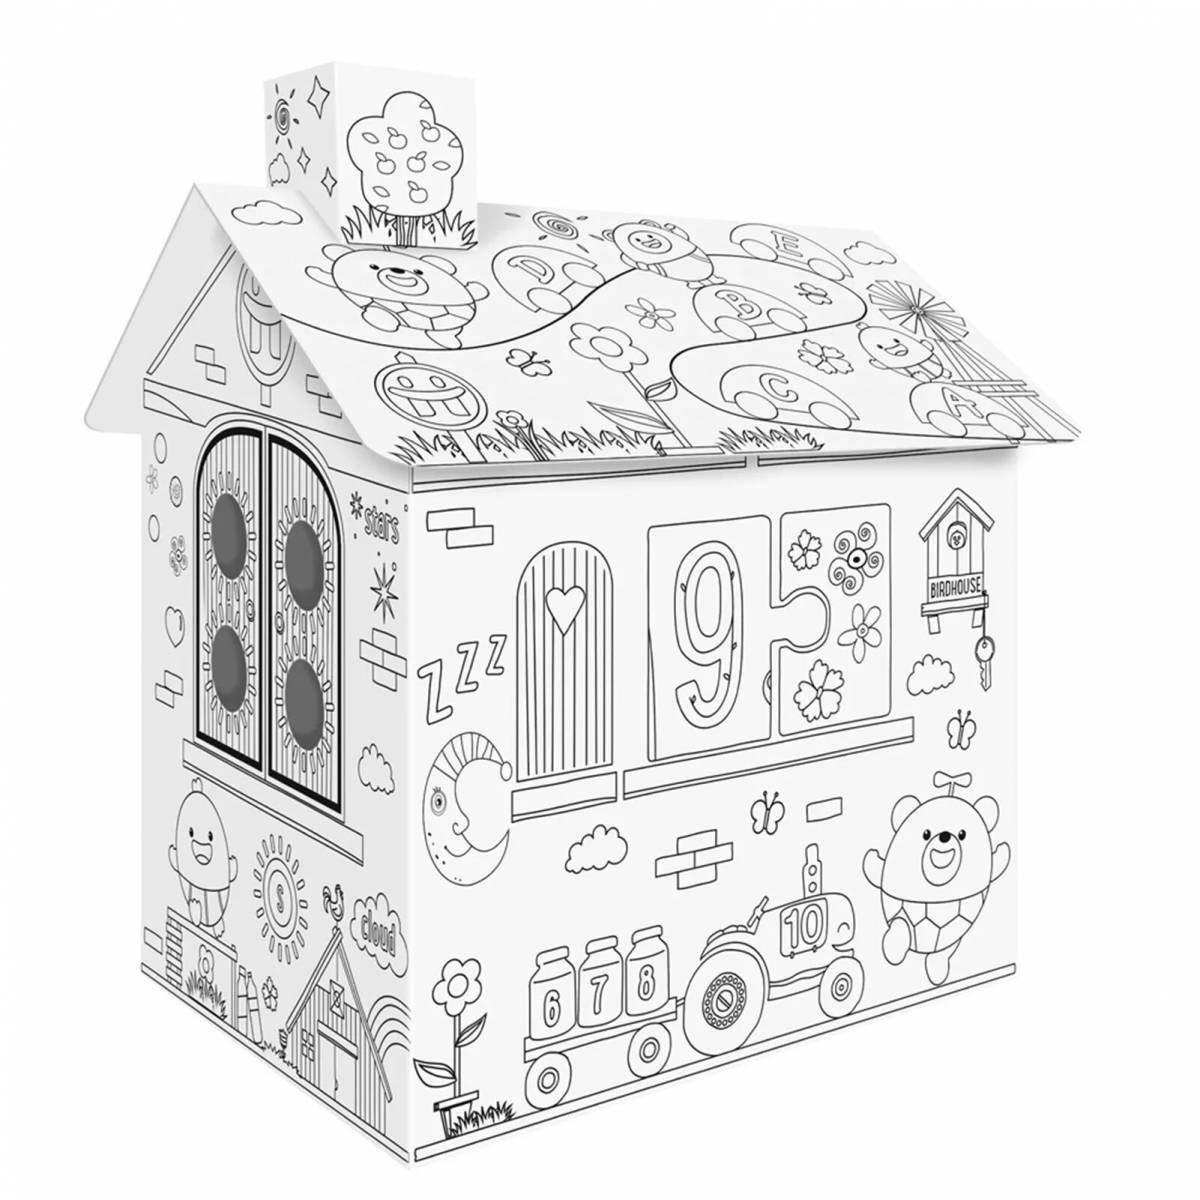 Coloring book grandiose house of rich family